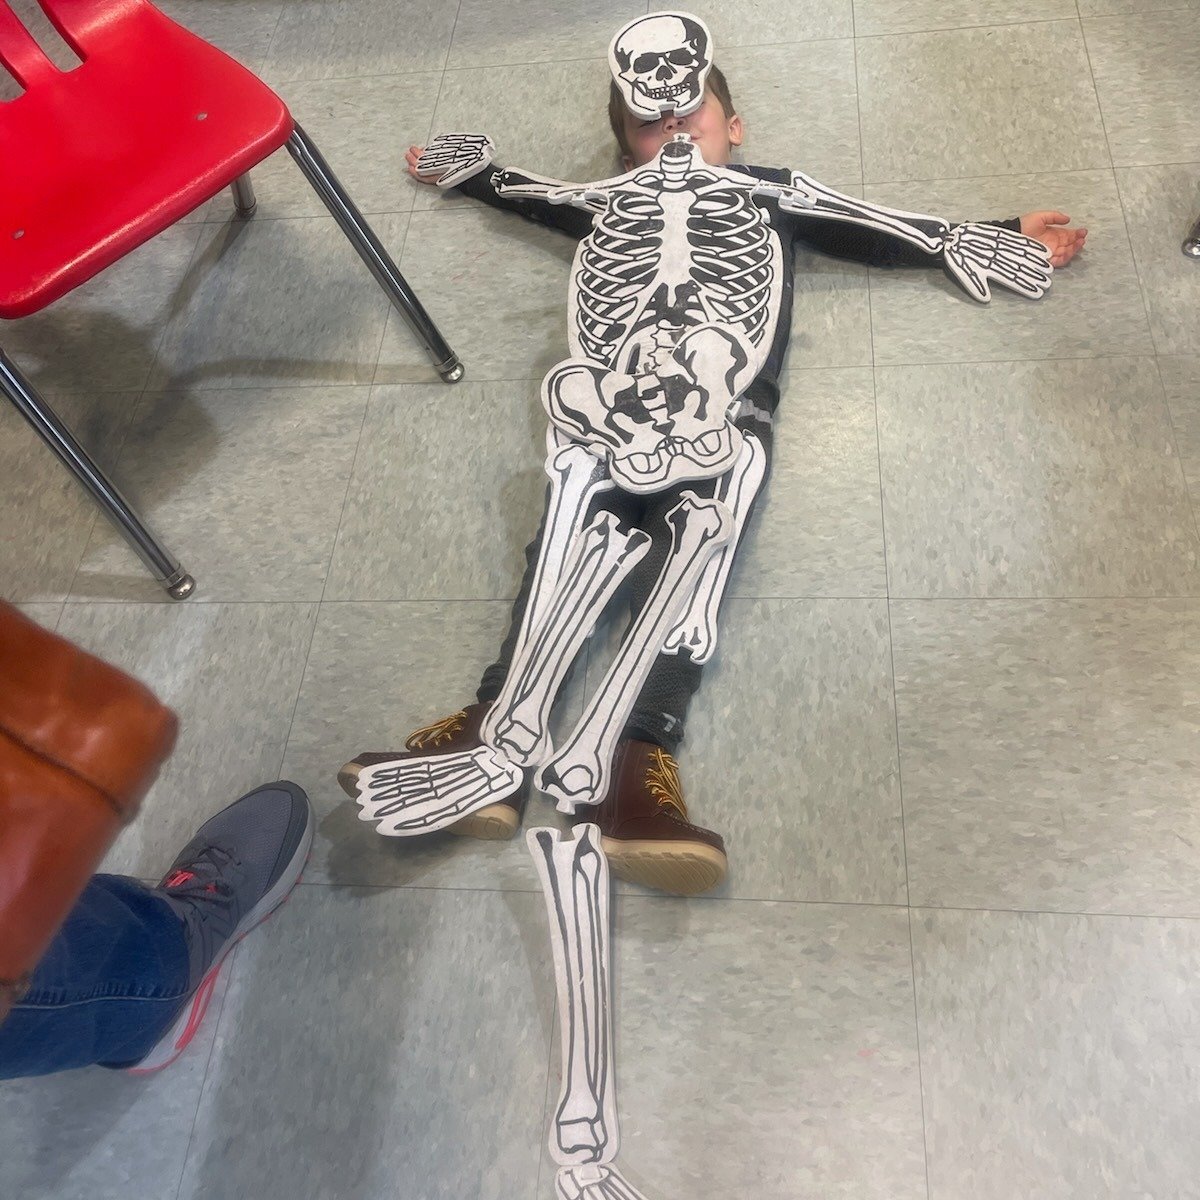 Check out this kiddo. Looks like he's having fun learning about the skeletal system.